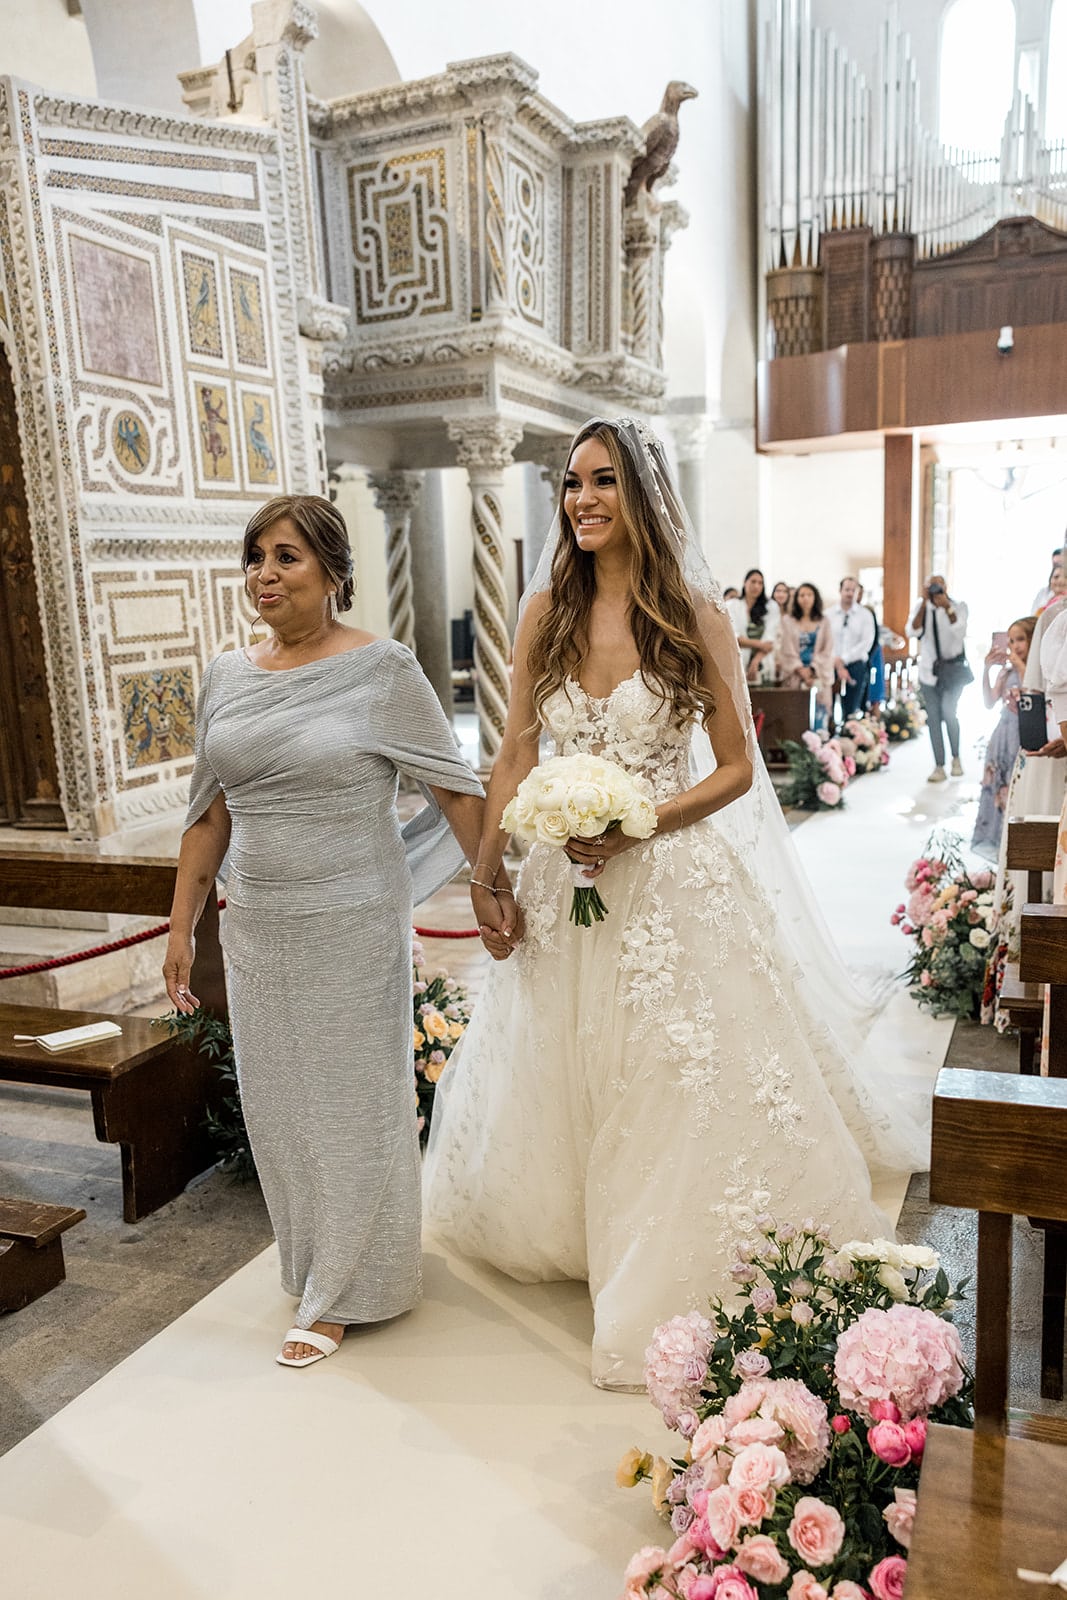 Mother and bride walk down aisle at Ravello wedding venue